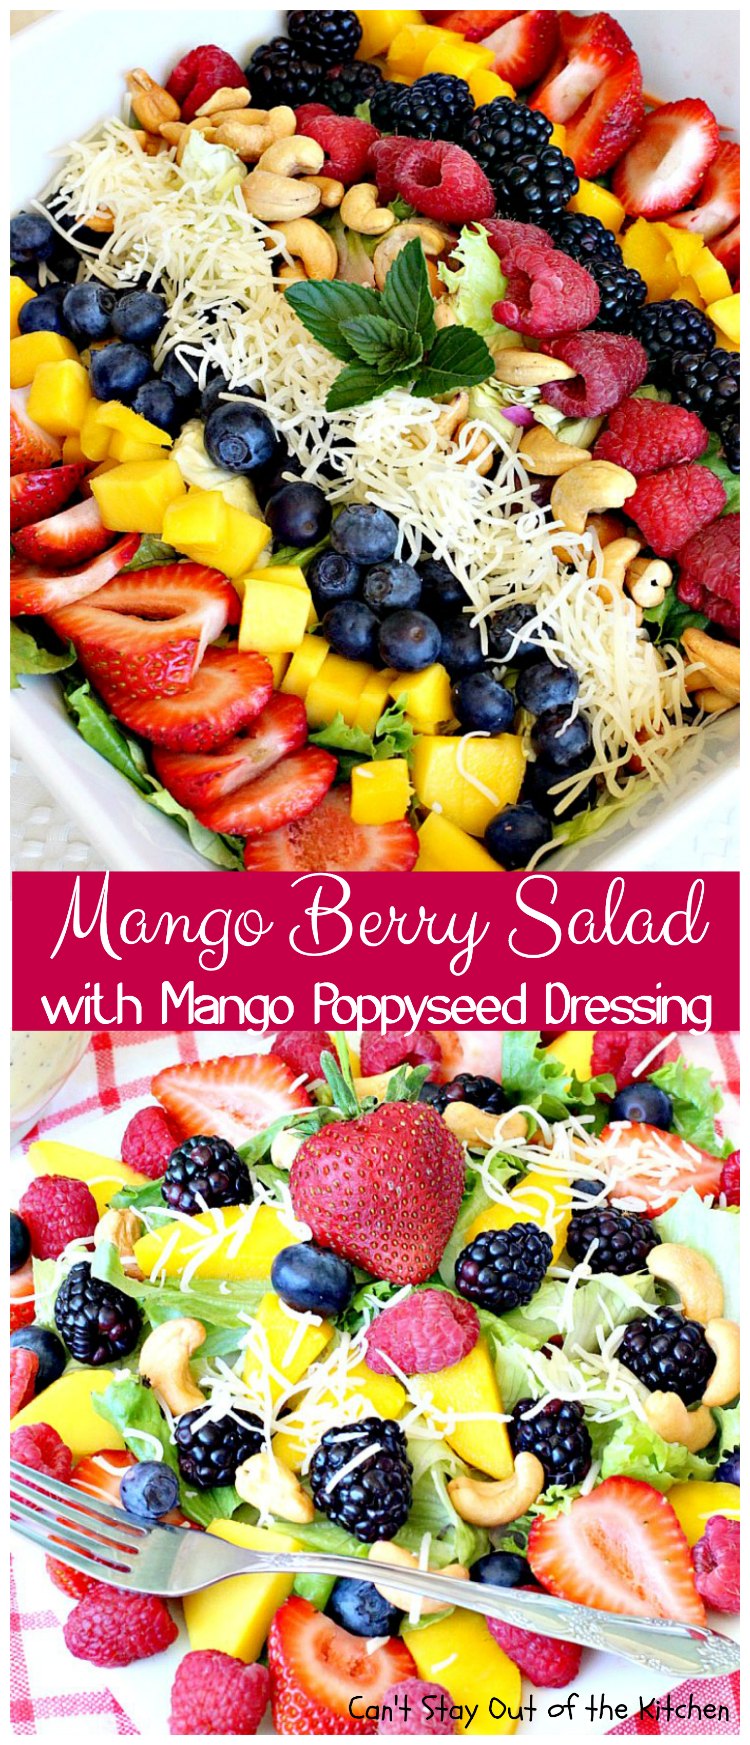 Mango Berry Salad with Mango Poppyseed Dressing | Can't Stay Out of the Kitchen